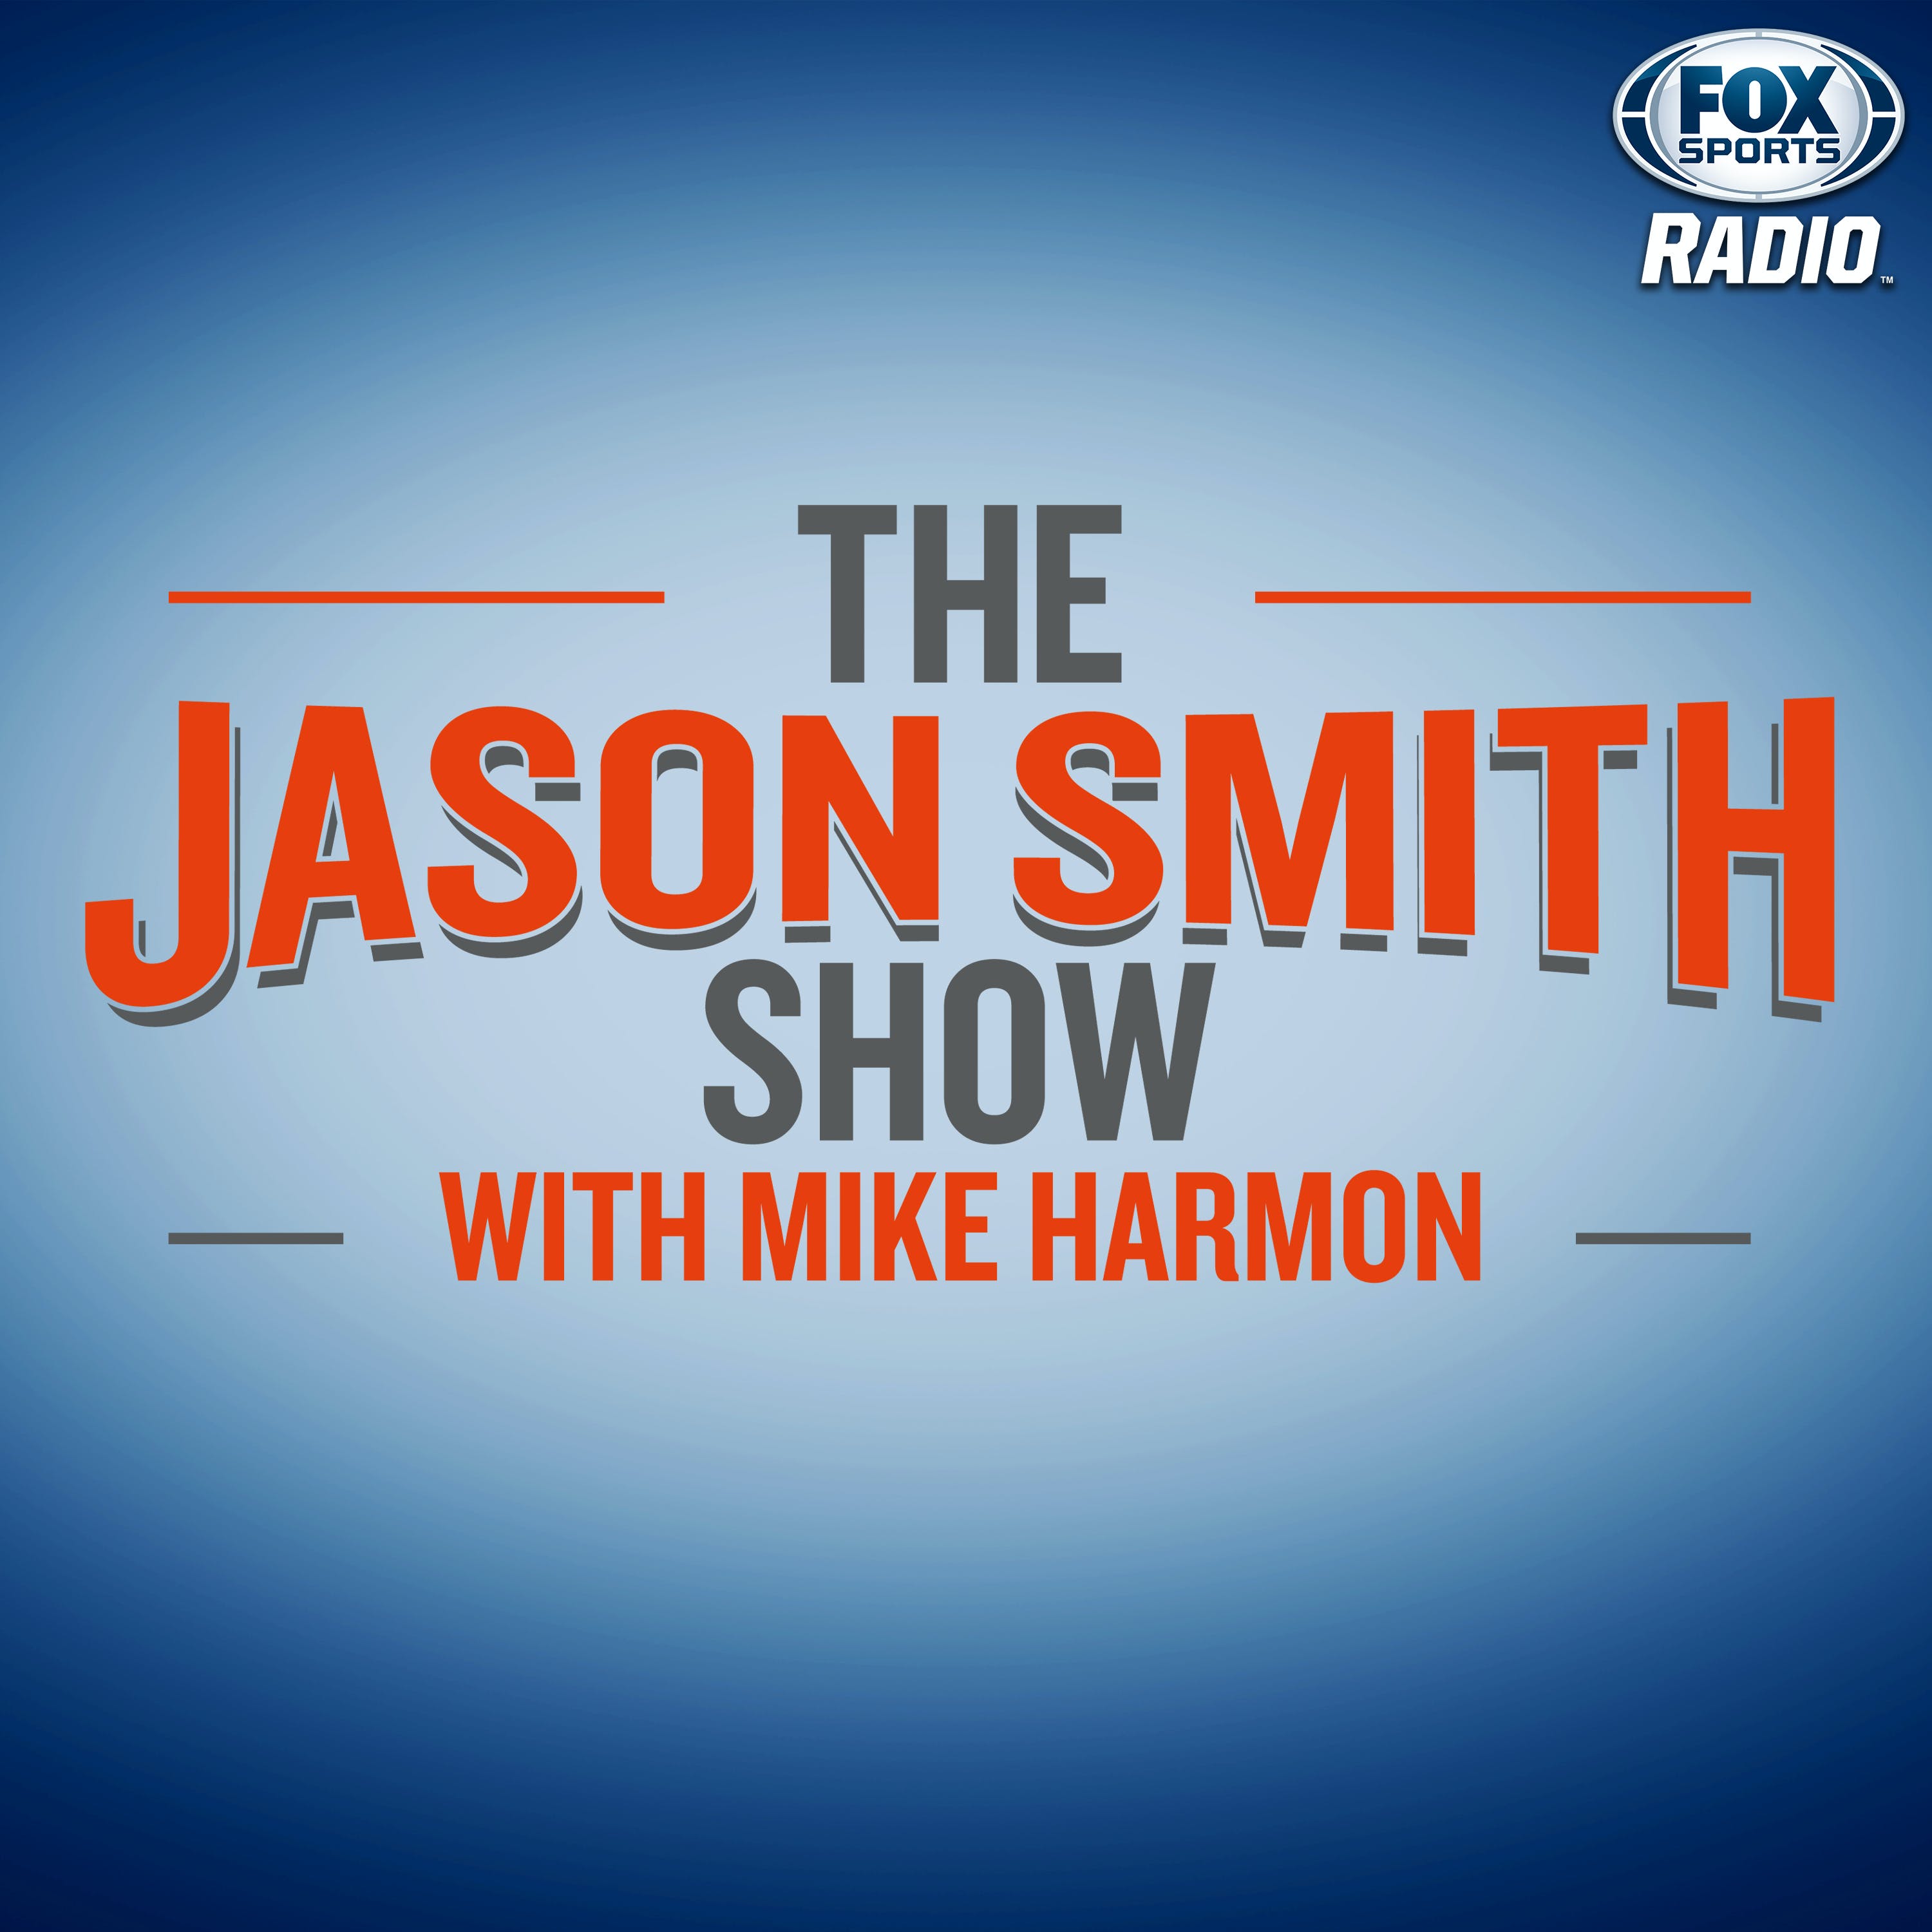 The Best of the Week on The Jason Smith Show with Mike Harmon